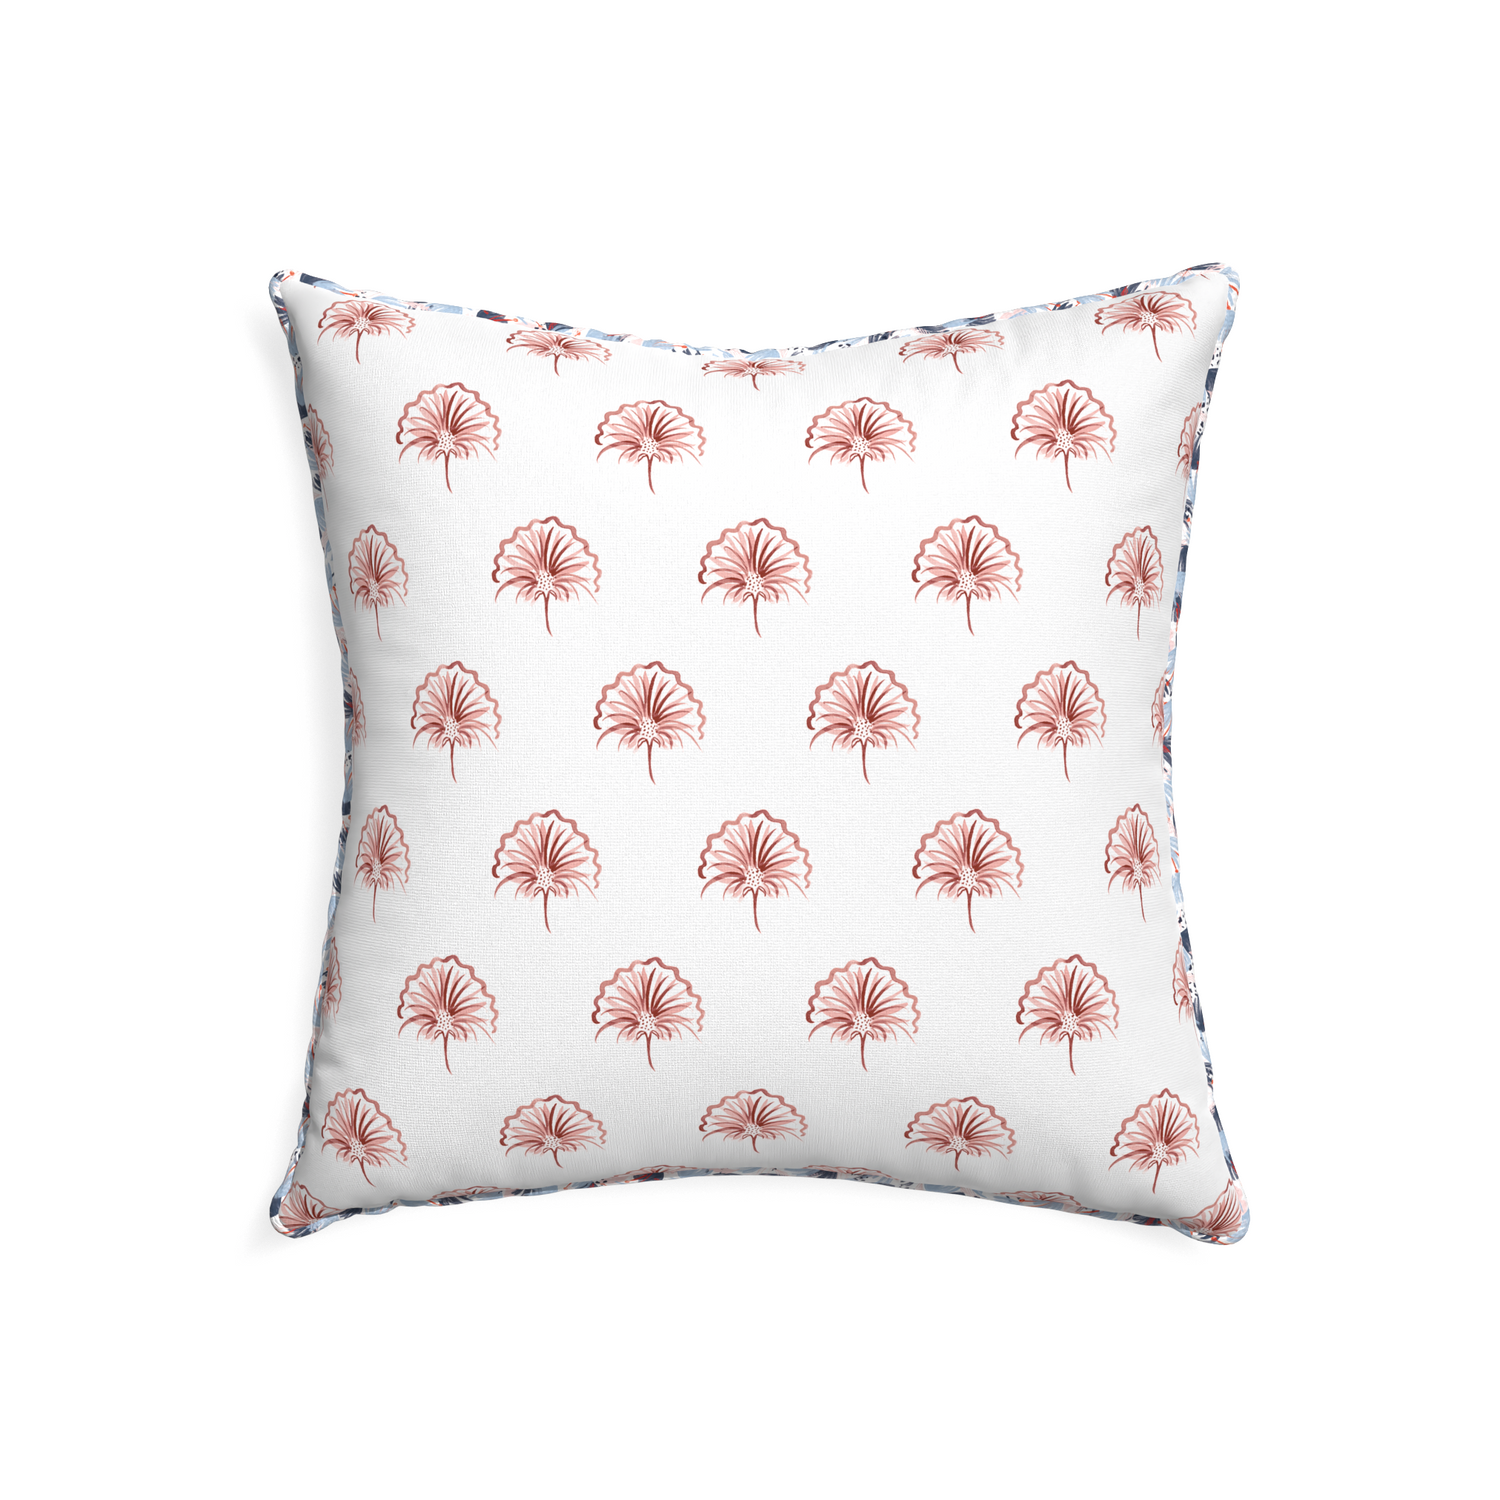 22-square penelope rose custom floral pinkpillow with e piping on white background